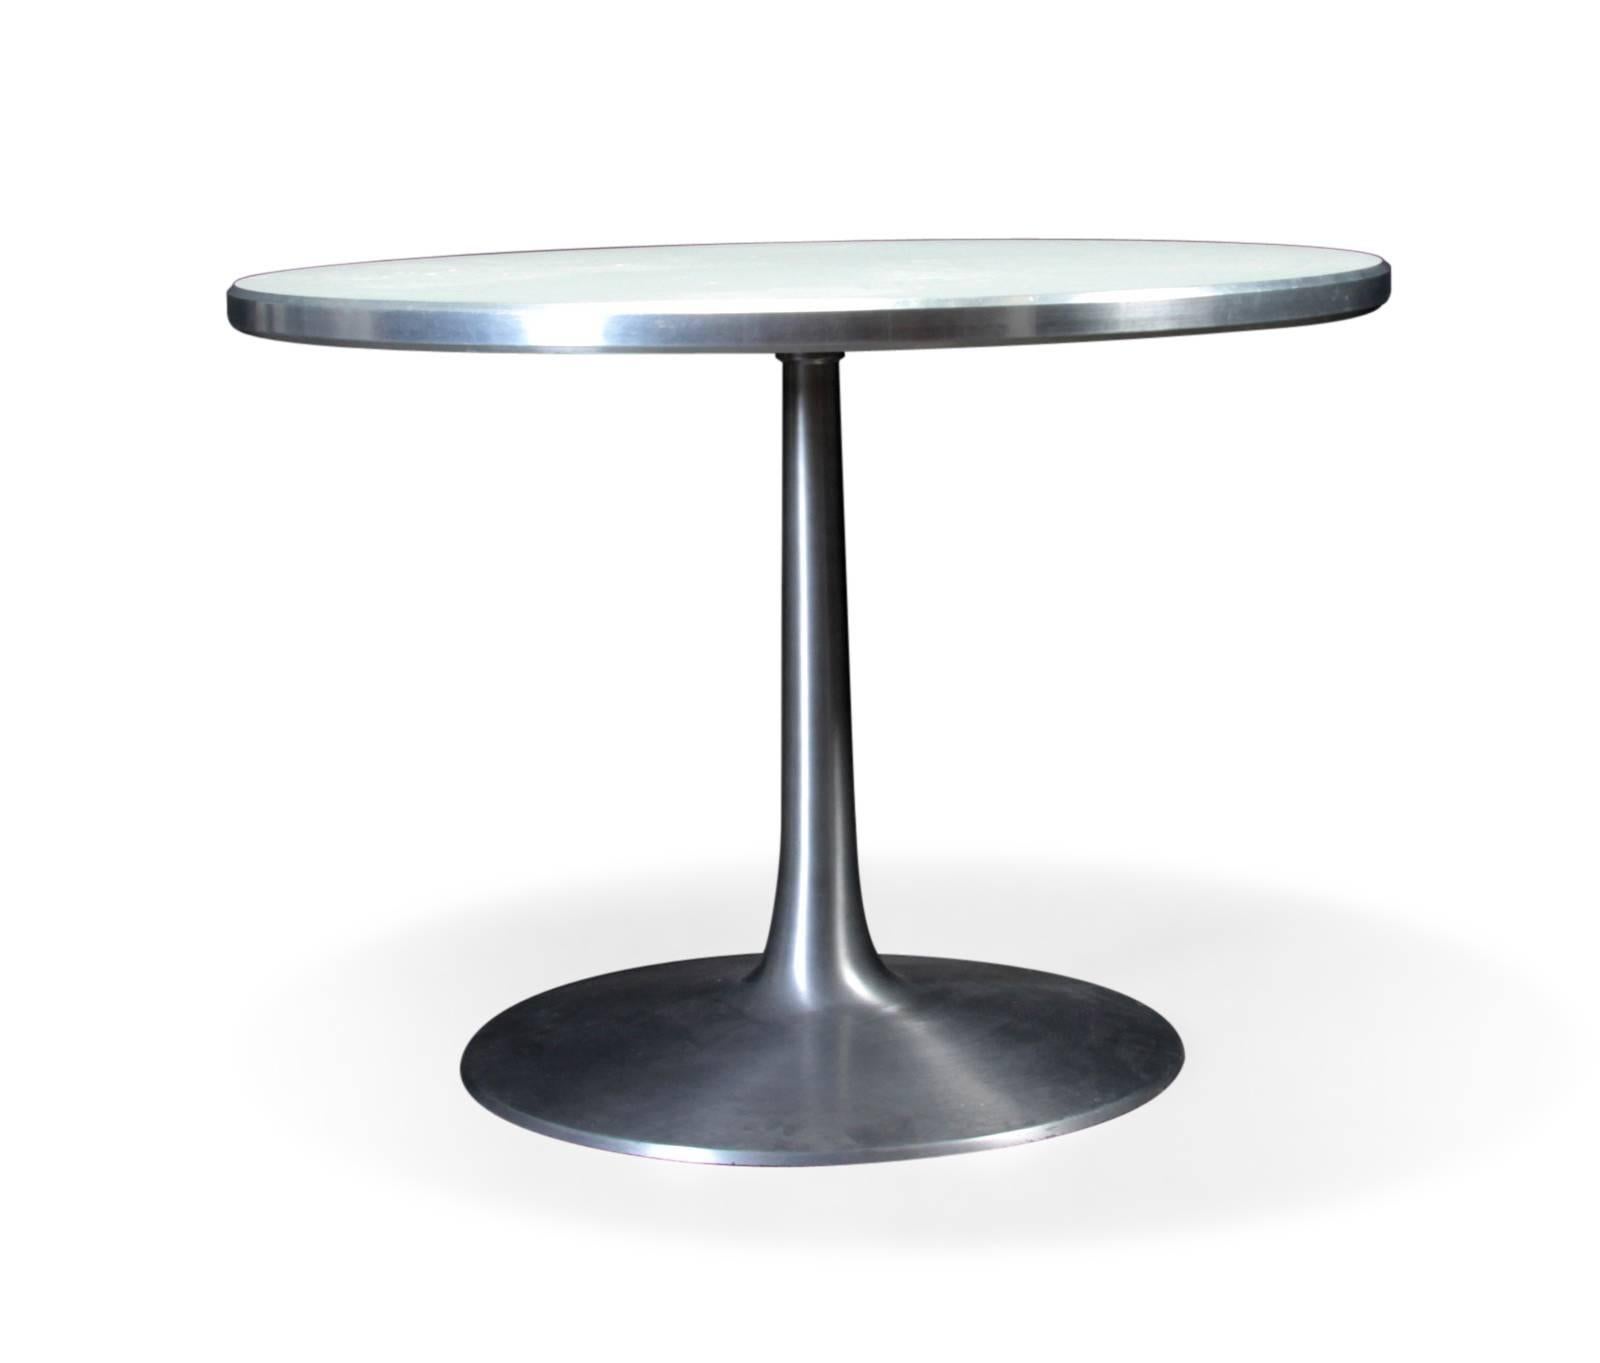 Poul Cadovius. Circular dining table, model 631. Trumpet base in brushed aluminum die-cast. Table top in white laminate with aluminum edge. Made for France og Søn. Measure: H 71, approximate 100 cm. Signs of wear, scratches on the foot.